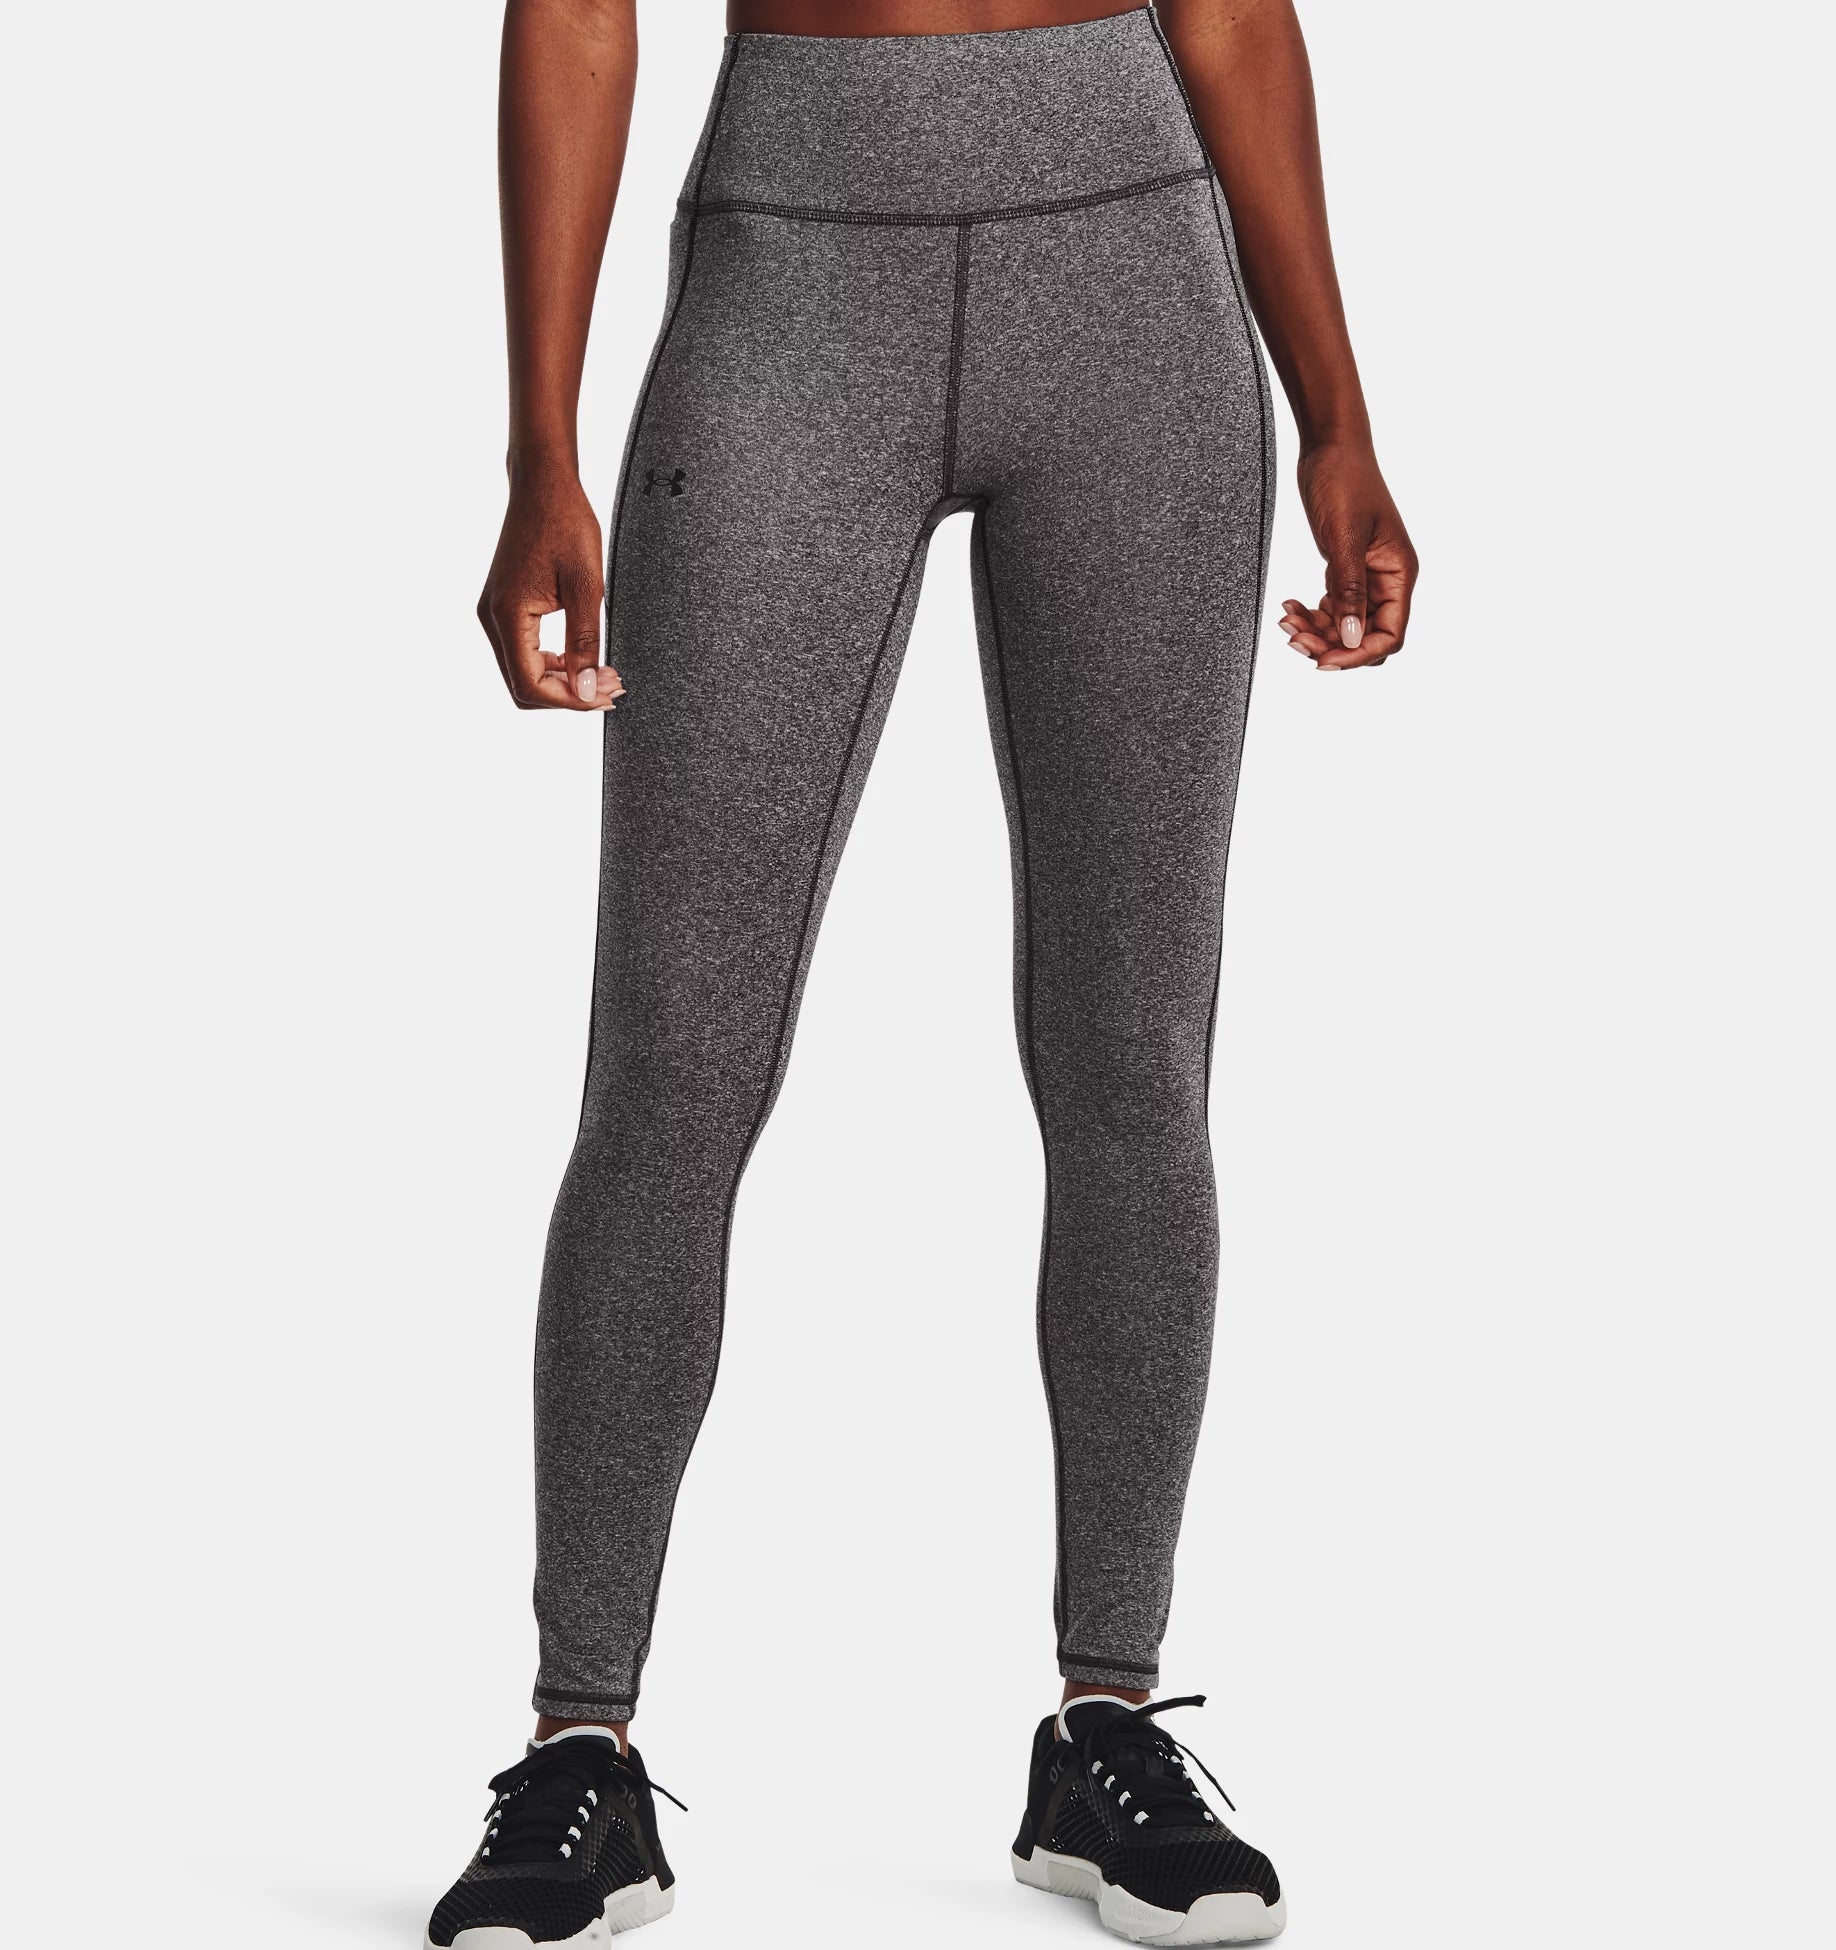 Under Armour Train Cold Weather Leggings-Sports Replay - Sports Excellence-Sports Replay - Sports Excellence